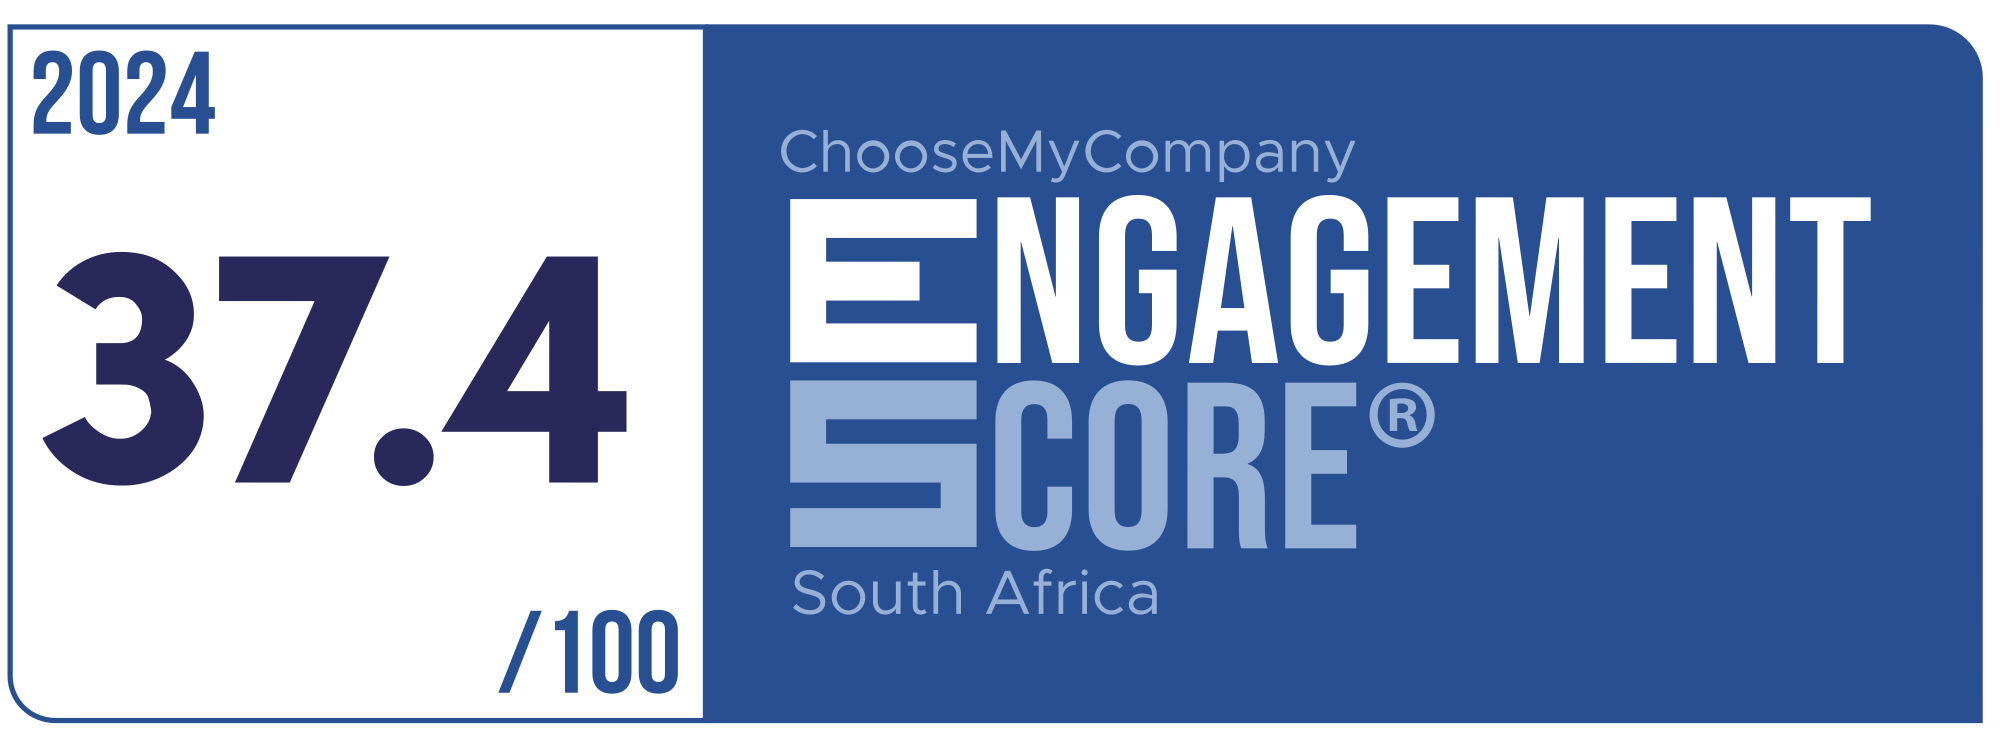 Label Engagement Score 2024 South Africa